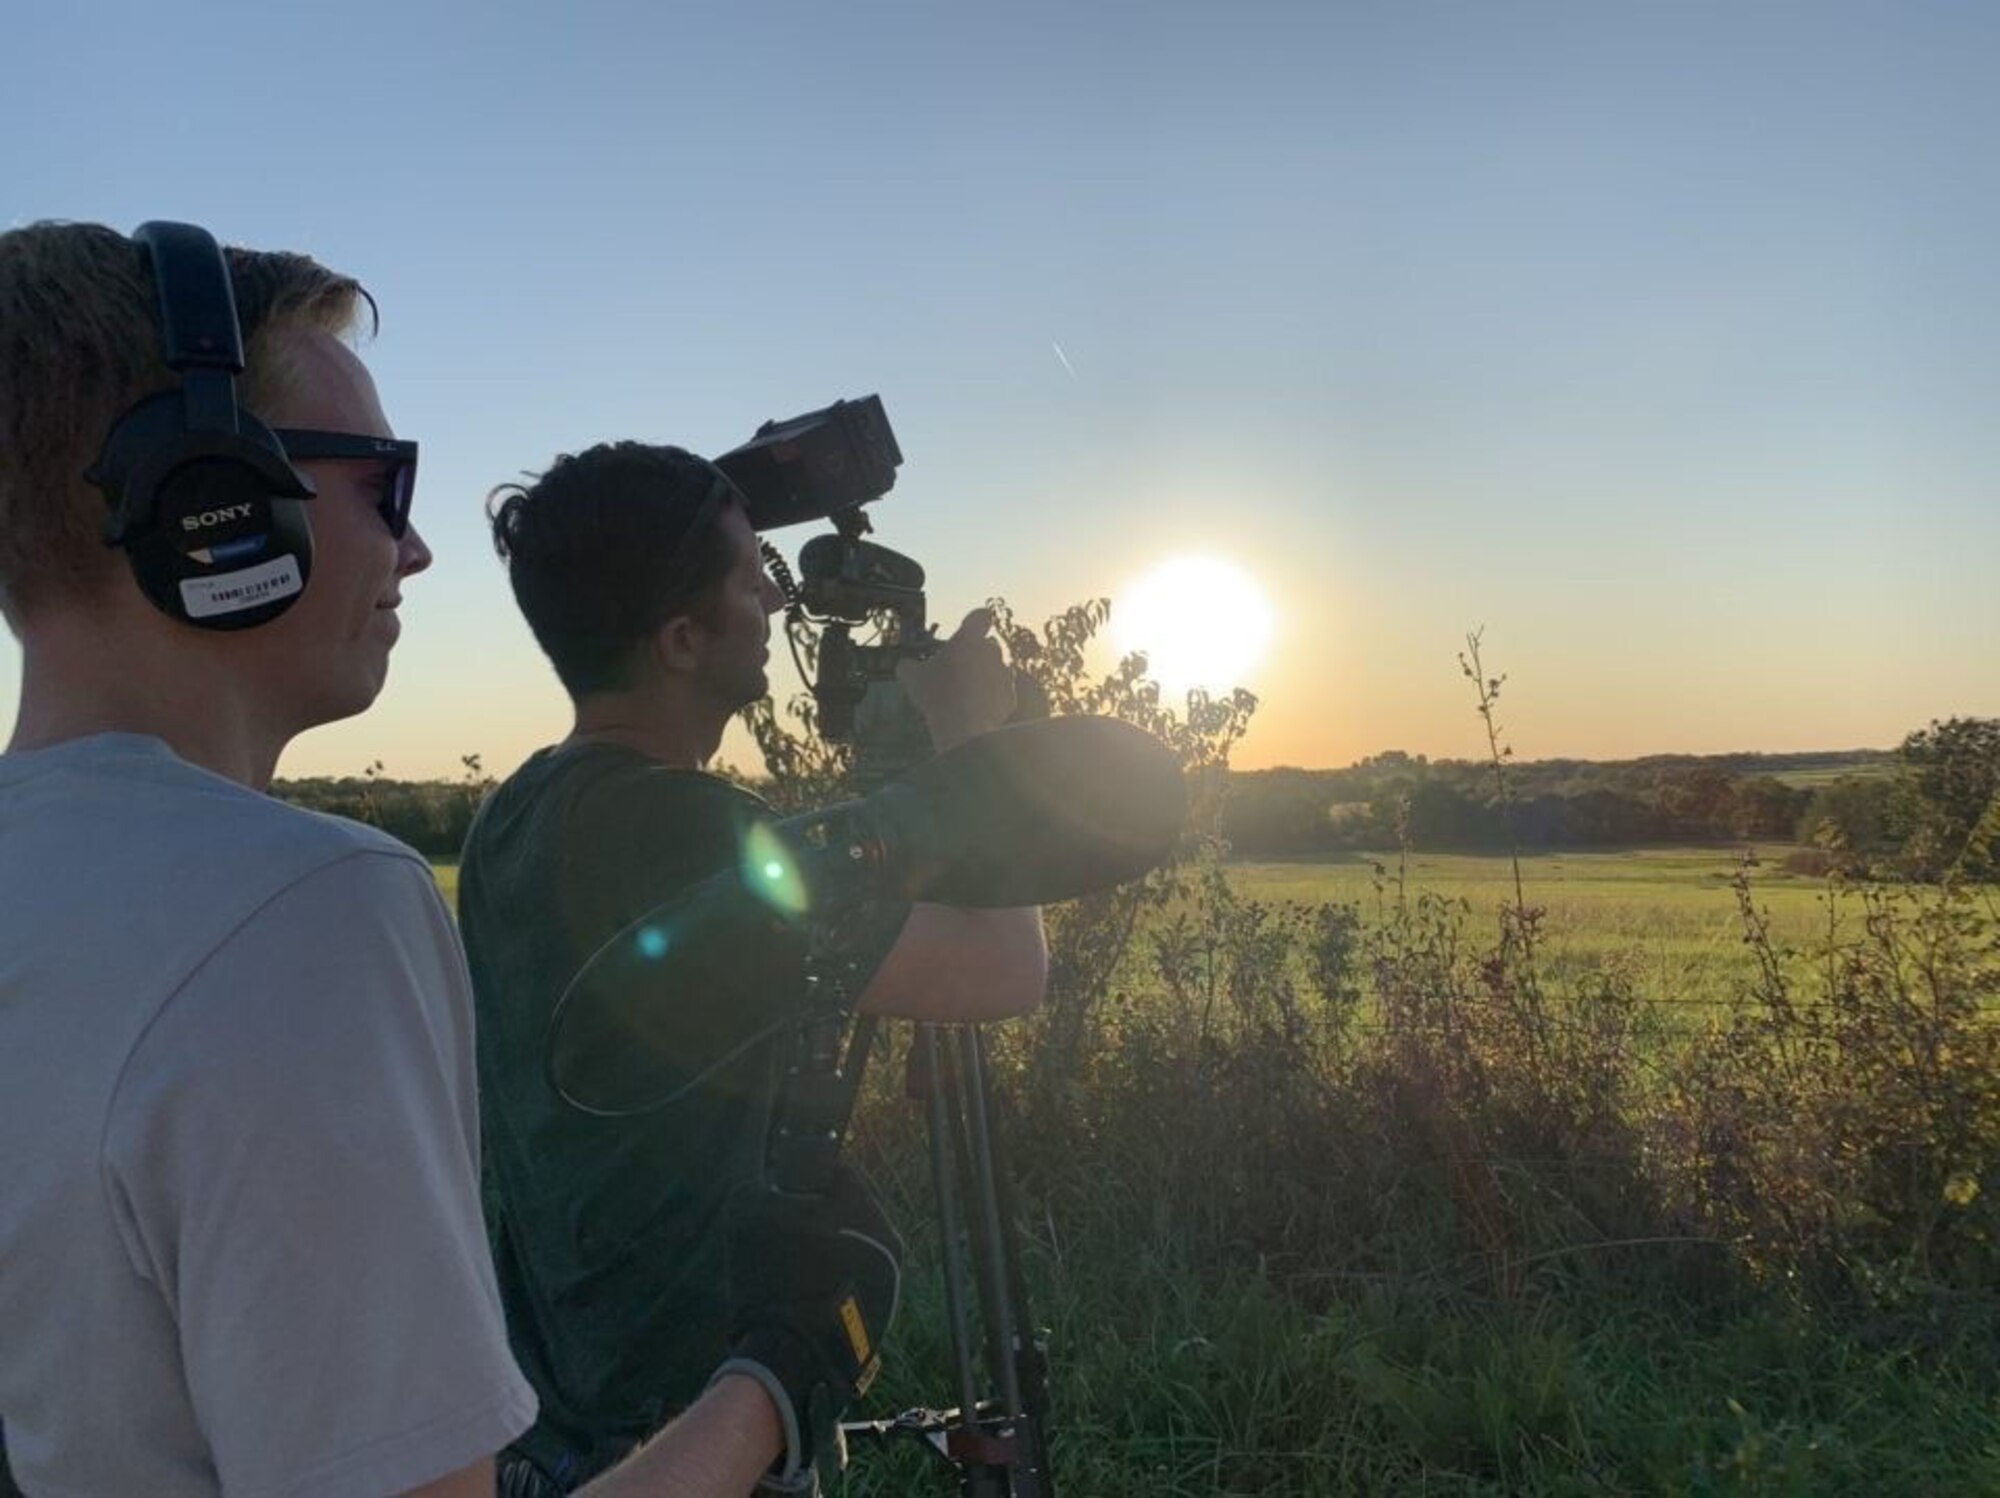 Ken Raimondi (right), a former Air Force recruiter and current civil service producer and director with the 3rd Audio Visual Squadron, captures a quiet moment on a farm in Leeton, Mo. while filming, “Basic,” an eight-part documentary series sponsored by Air Force Recruiting Service that follows five individuals as they transition from civilian to Airman.